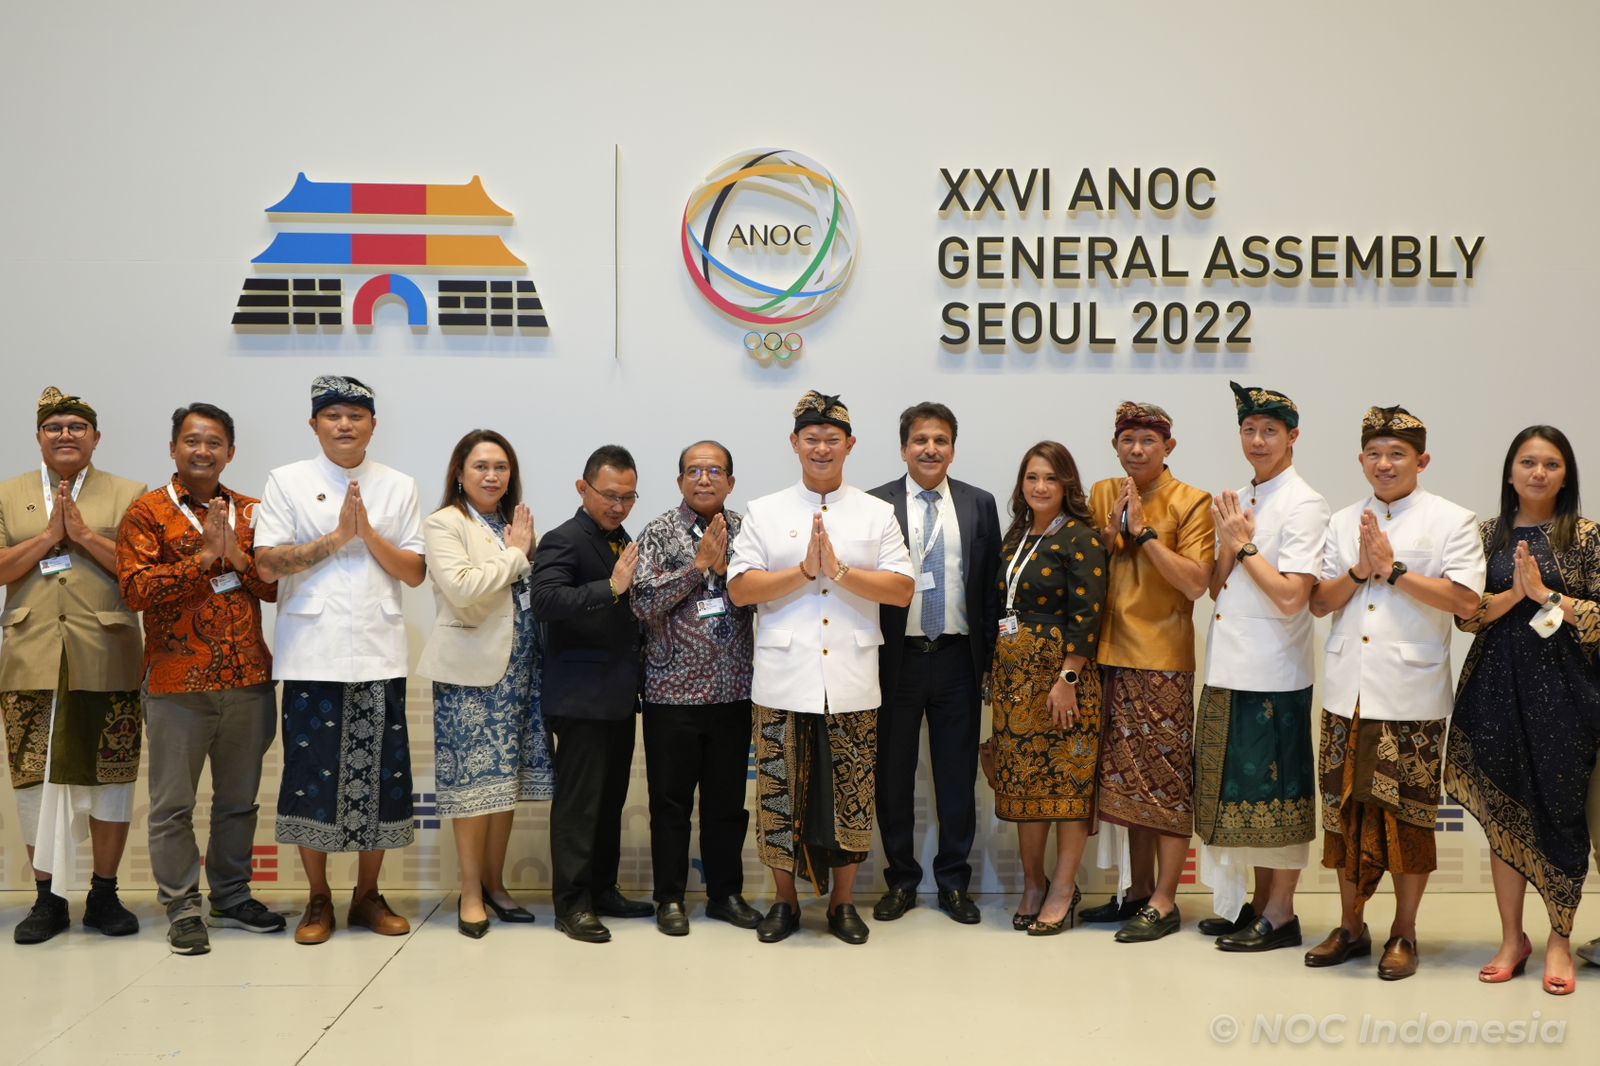 Indonesia Olympic Commitee - Indonesia Garners Praise As Bali's Exotic Flair The Highlight of ANOC World Beach Games Presentation